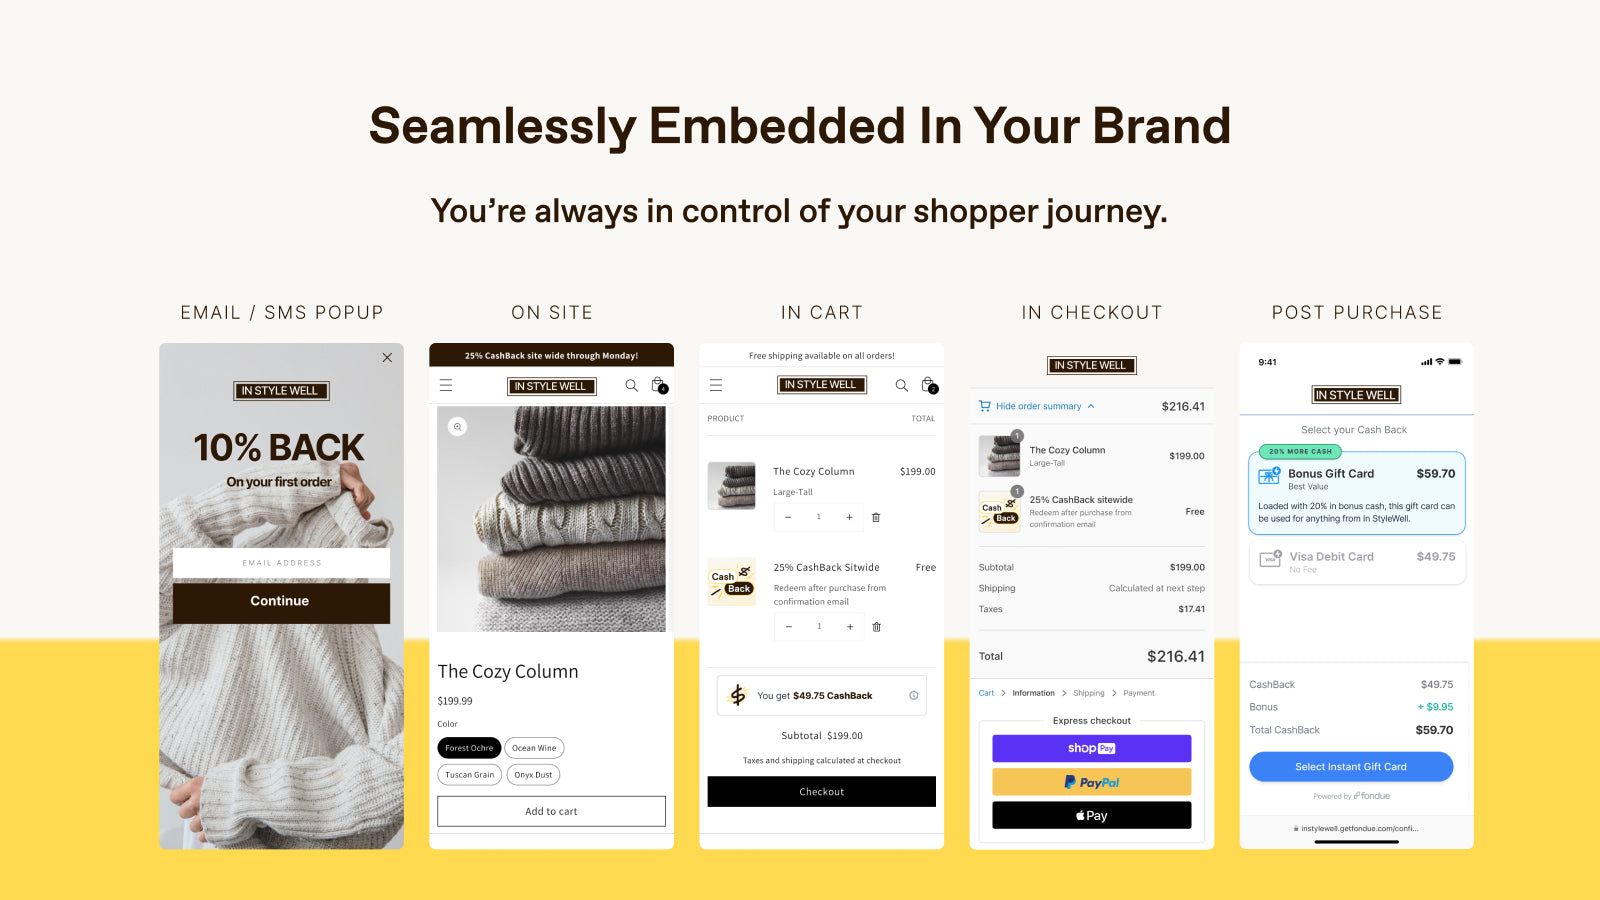 this tool can be as embedded in your own branding as you want